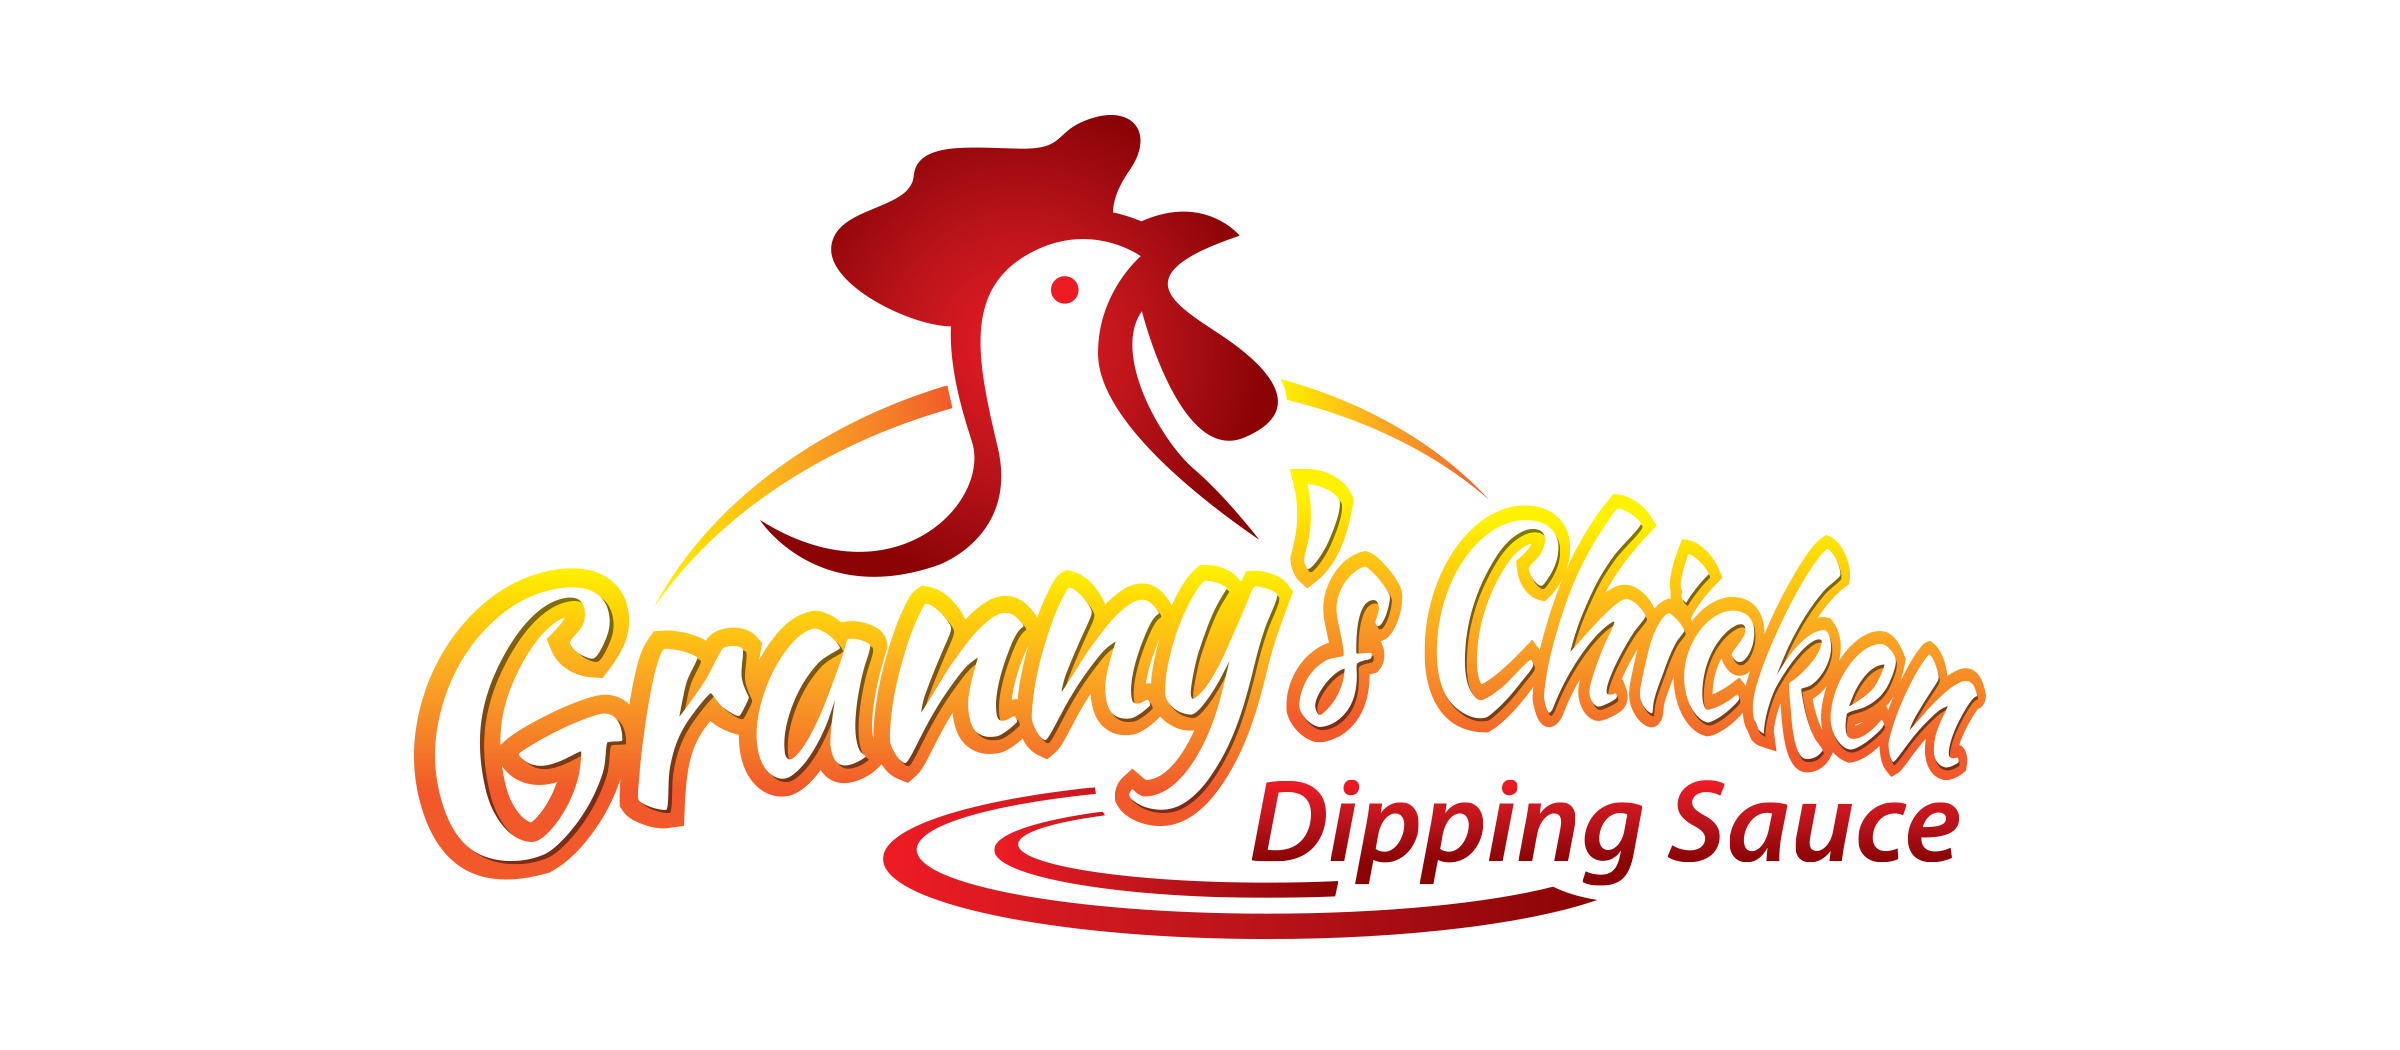 Add a bit of Granny’s Chicken Dipping Sauce to bring out the flavor in any food.